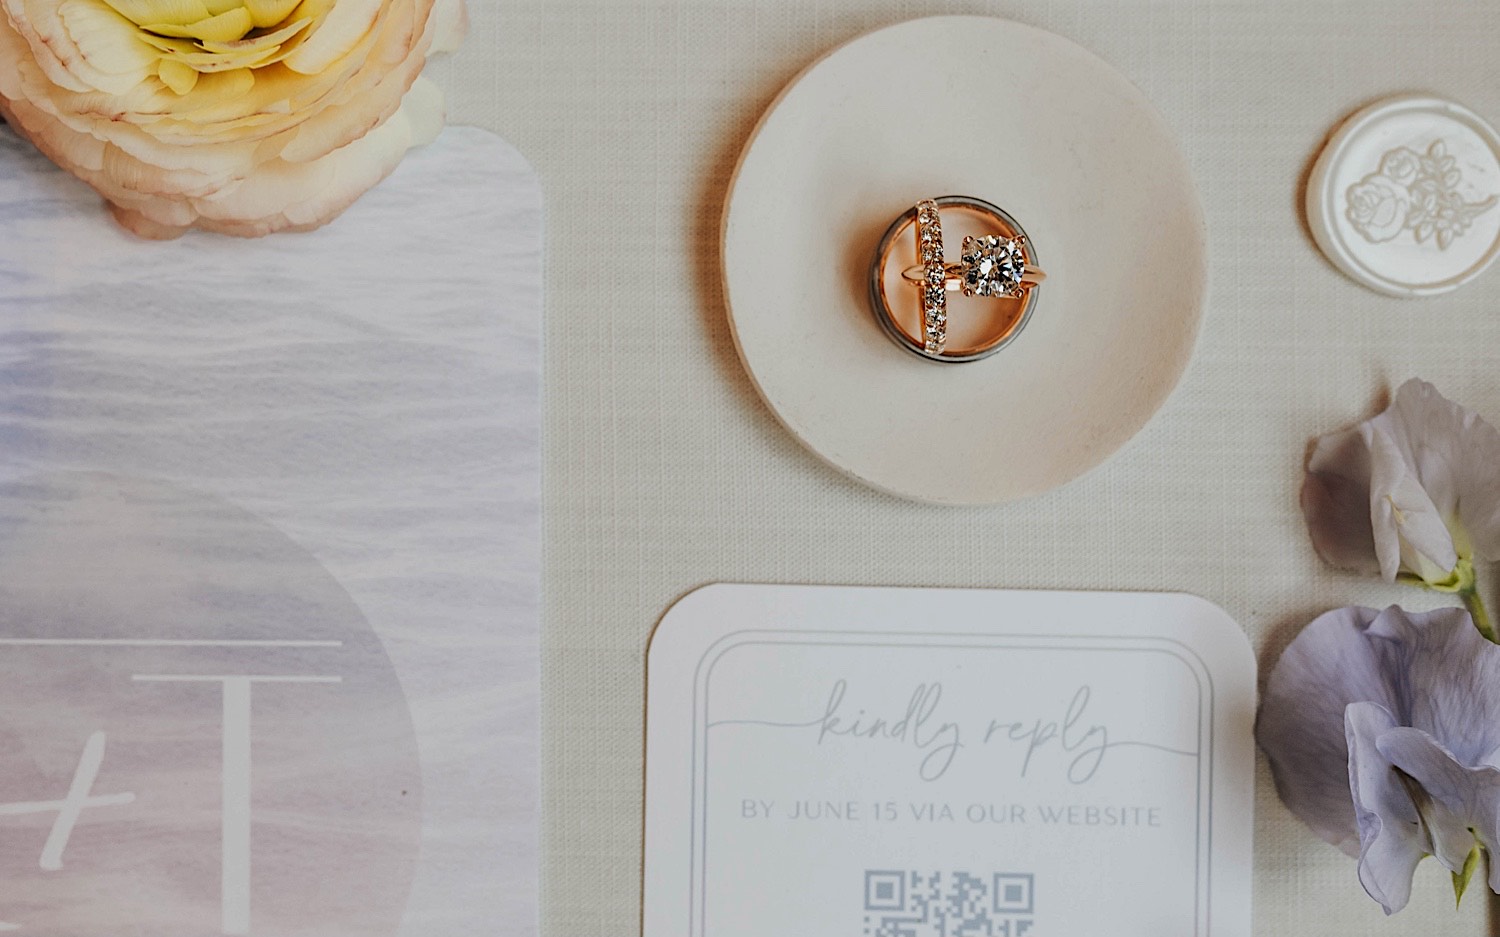 Close up photo of wedding rings sitting on a table as part of a wedding day flatlay